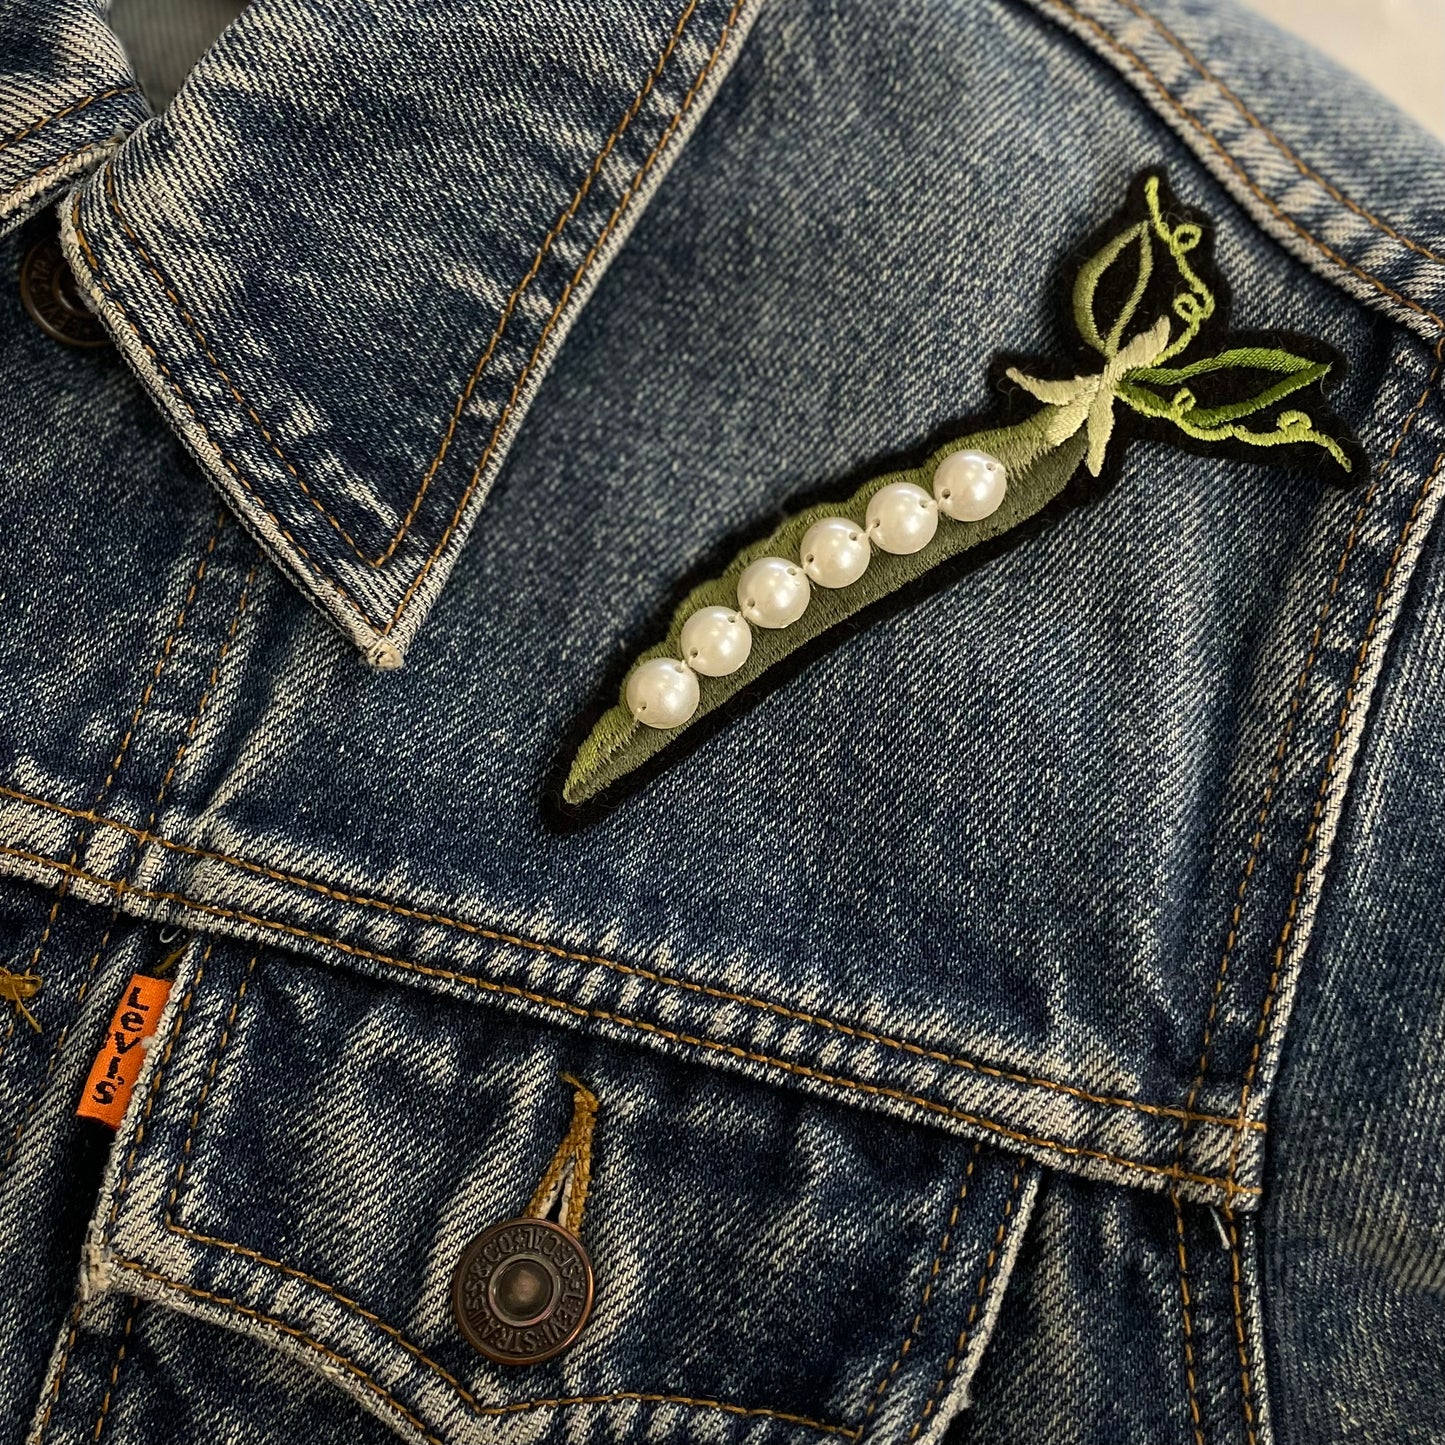 Single pea and pearl embroidered patch shown on the top front shoulder of a denim jacket